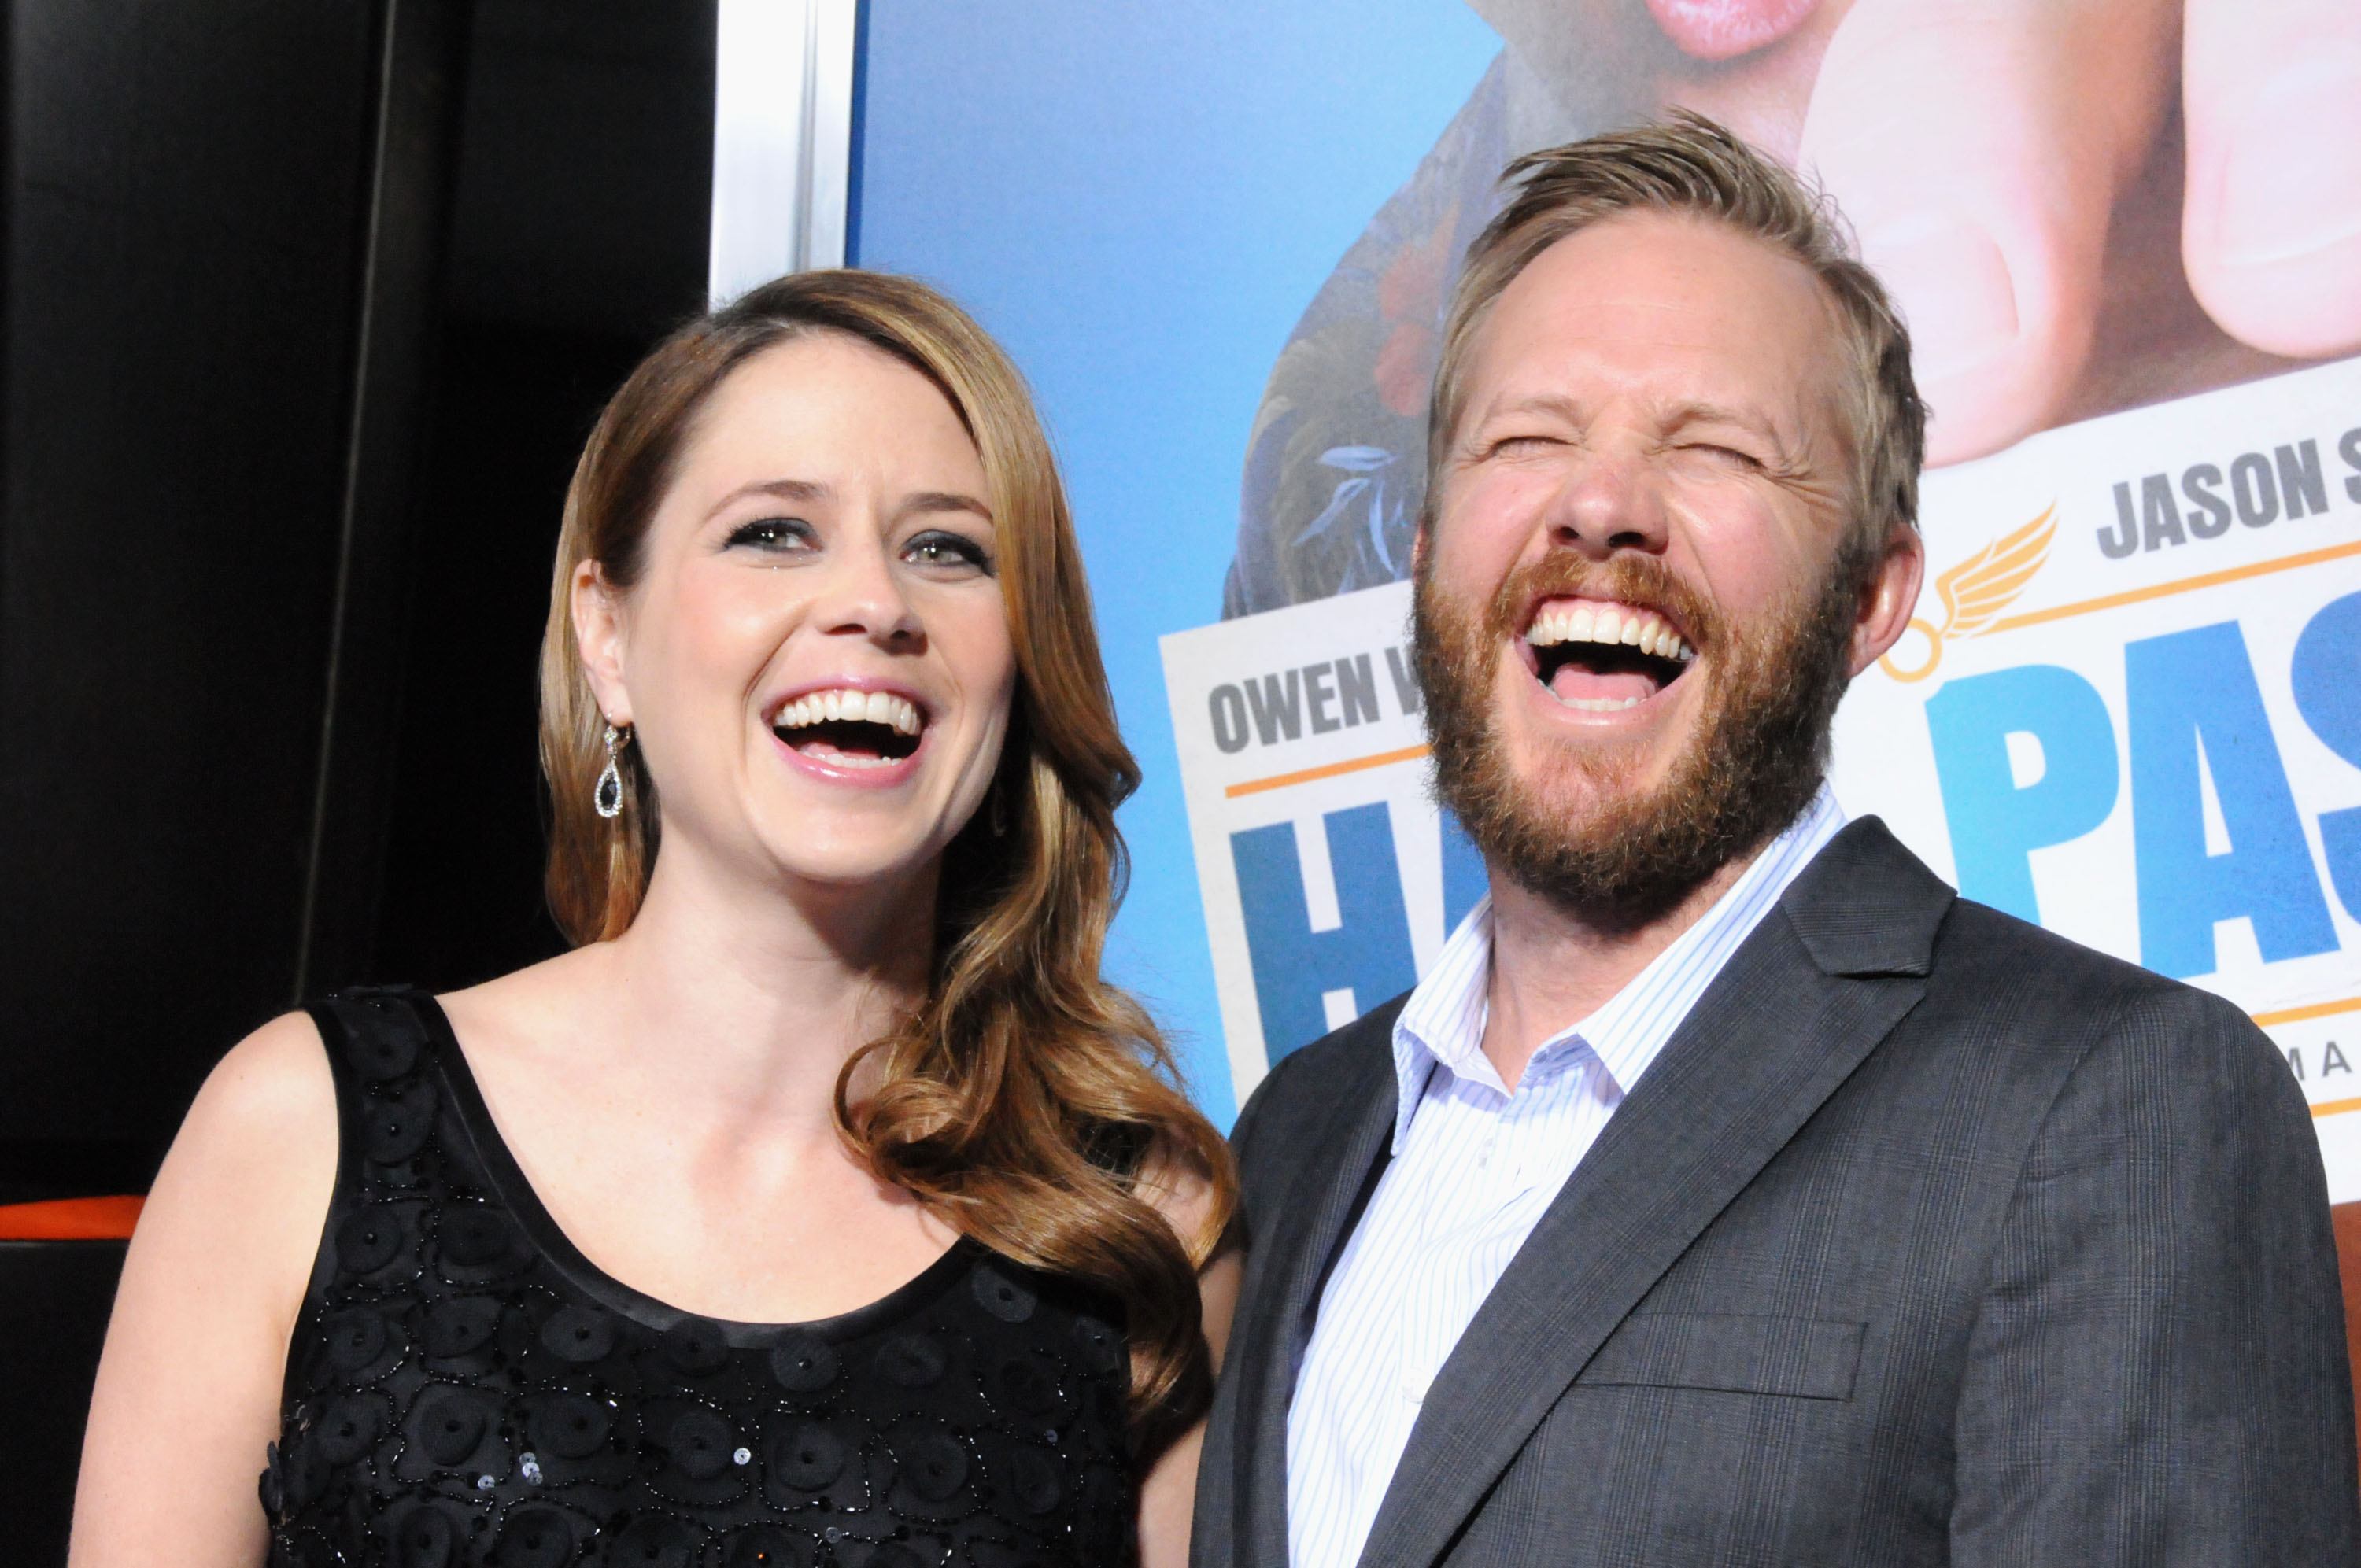 ctress Jenna Fischer and husband Lee Kirk arrive at the Los Angeles premiere of "Hall Pass" held at ArcLight Cinemas - Cinerama Dome, on February 23, 2011, in Hollywood, California. | Source: Getty Images